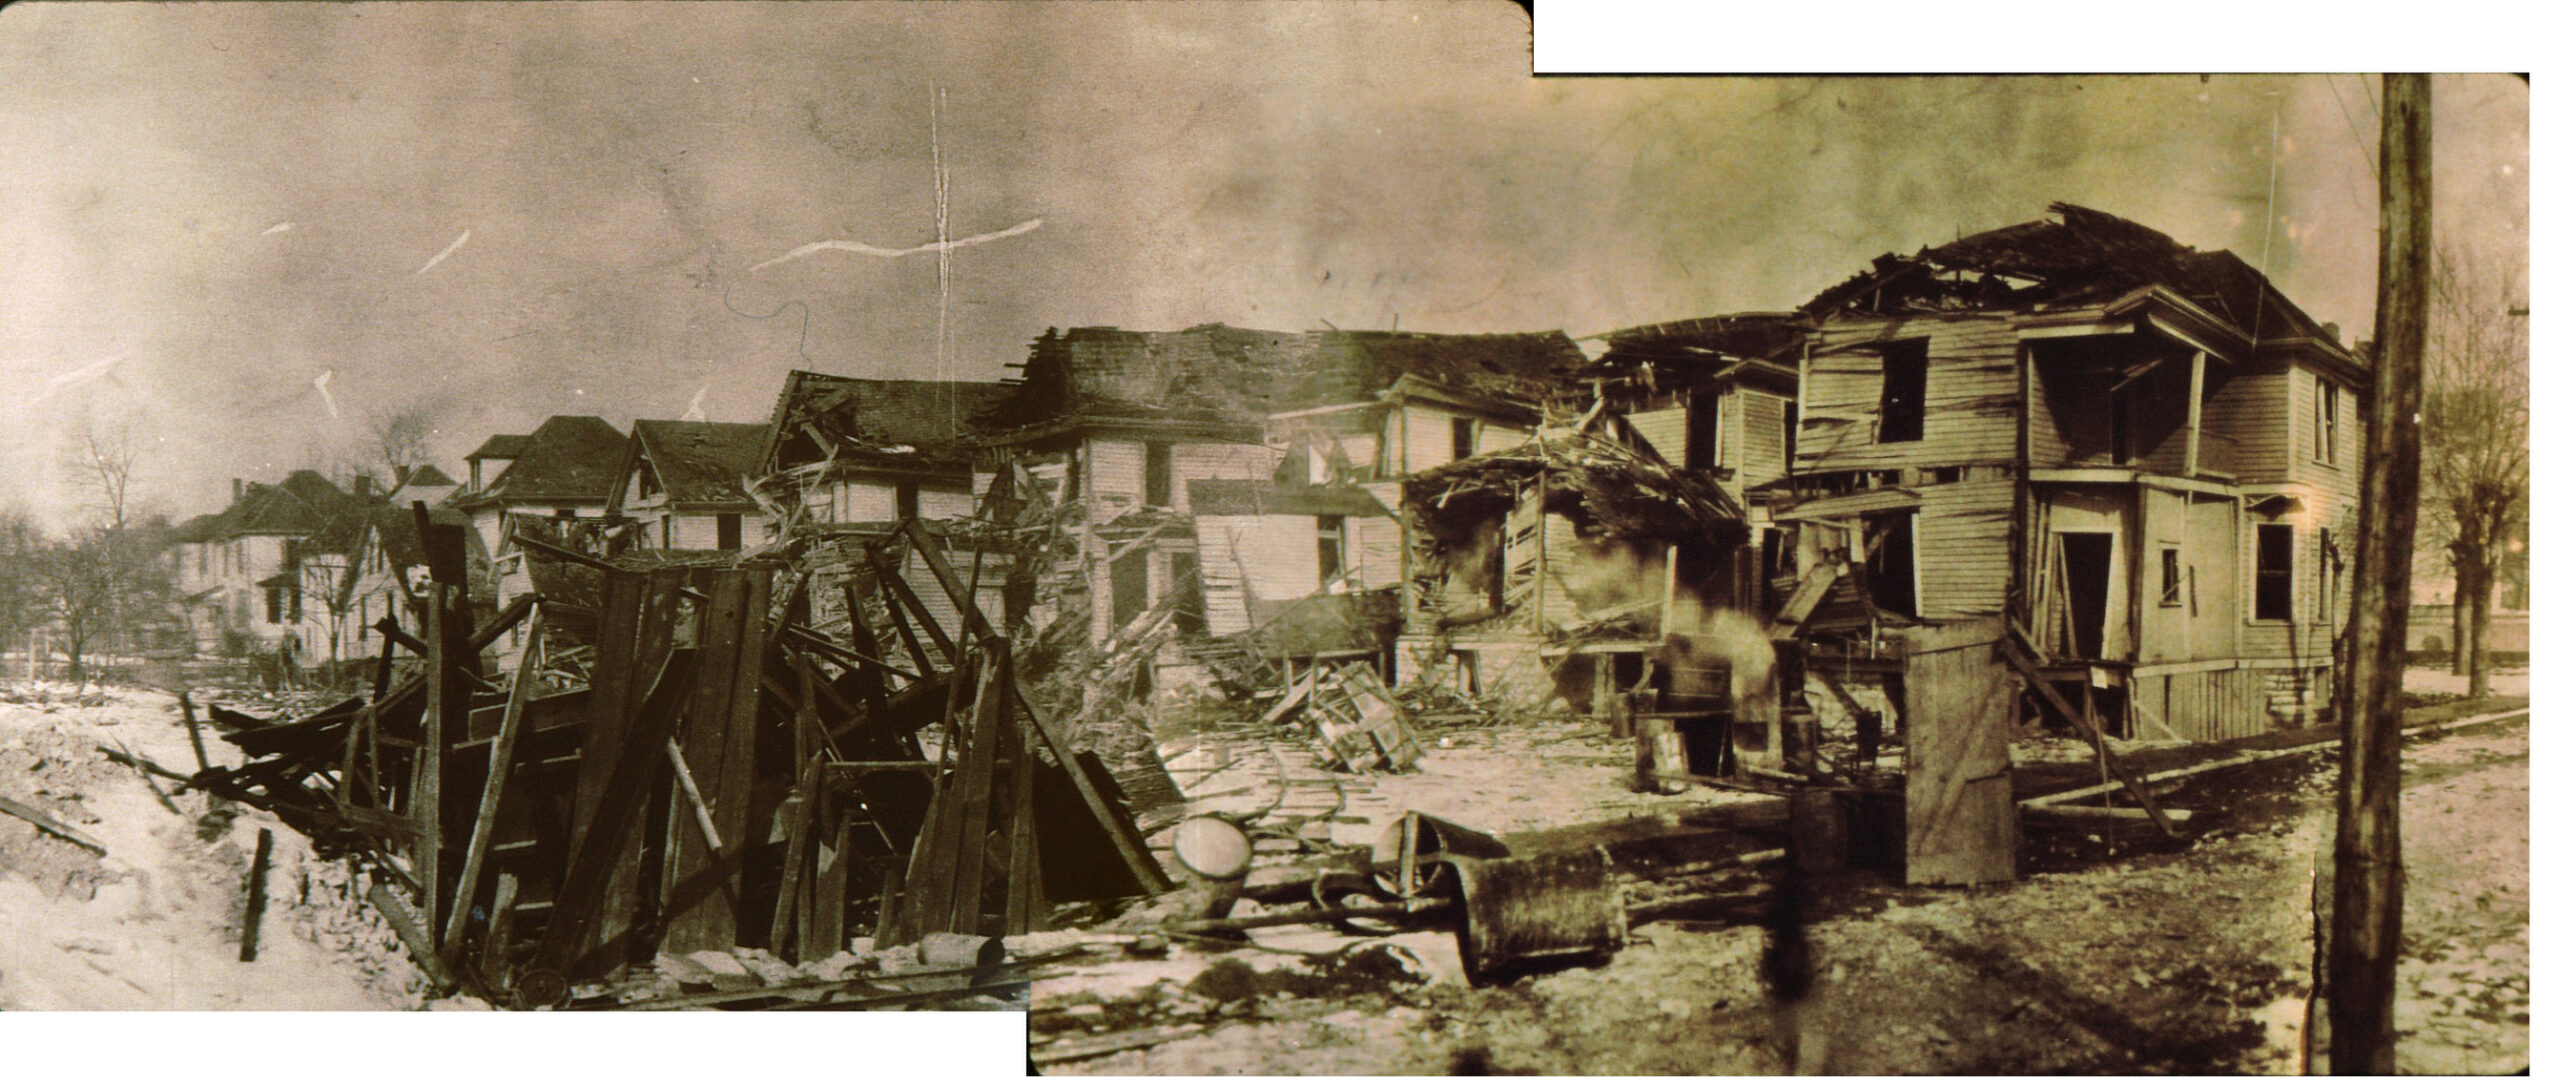 Maplewood History: Followup Articles After the 1916 Explosion